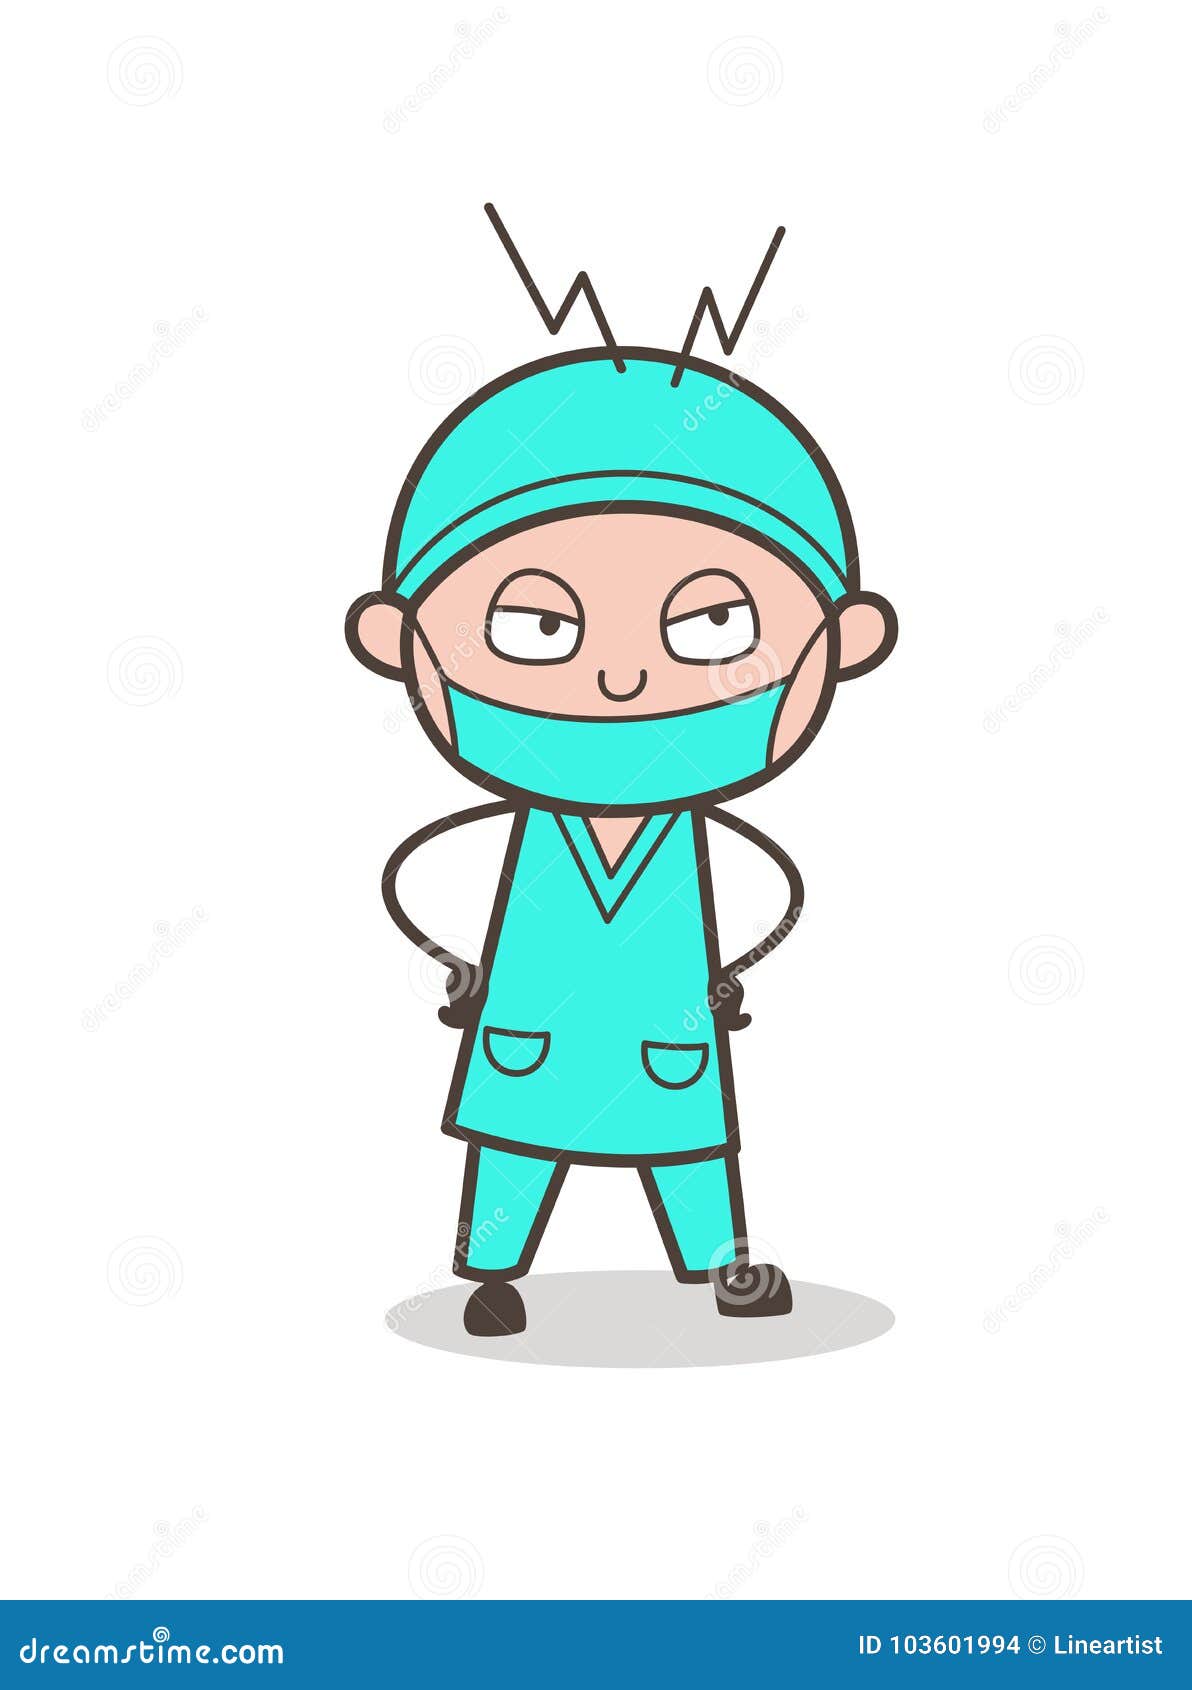 Cartoon Frustrated Surgeon Expression Vector Illustration Stock Illustration Illustration Of